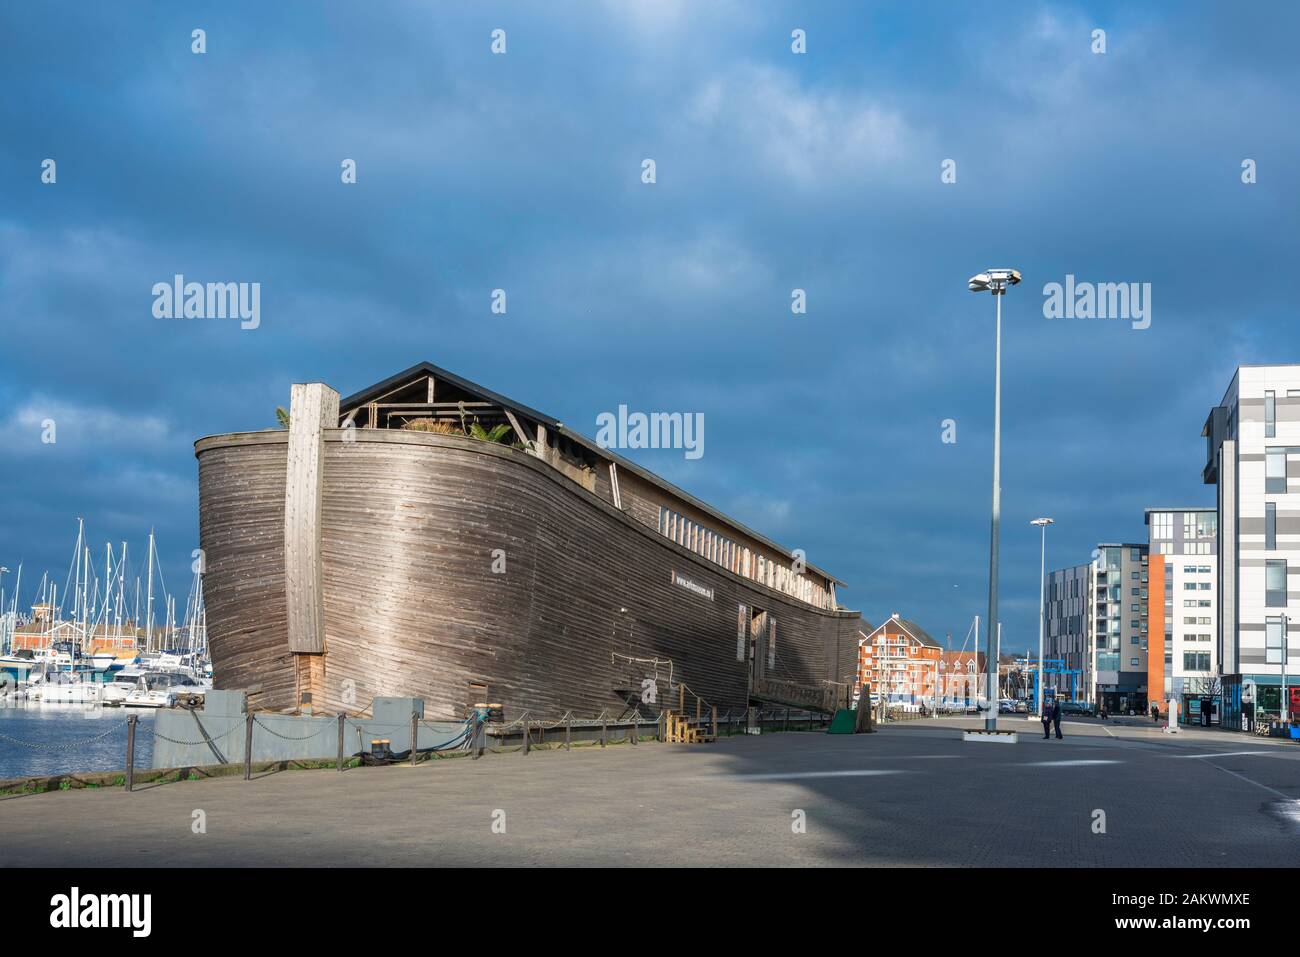 Ark museum, view of the Verhalen Ark, a floating biblical museum created by Sir Aad Peters, moored at Orwell Quay in Ipswich, Suffolk,England, UK Stock Photo